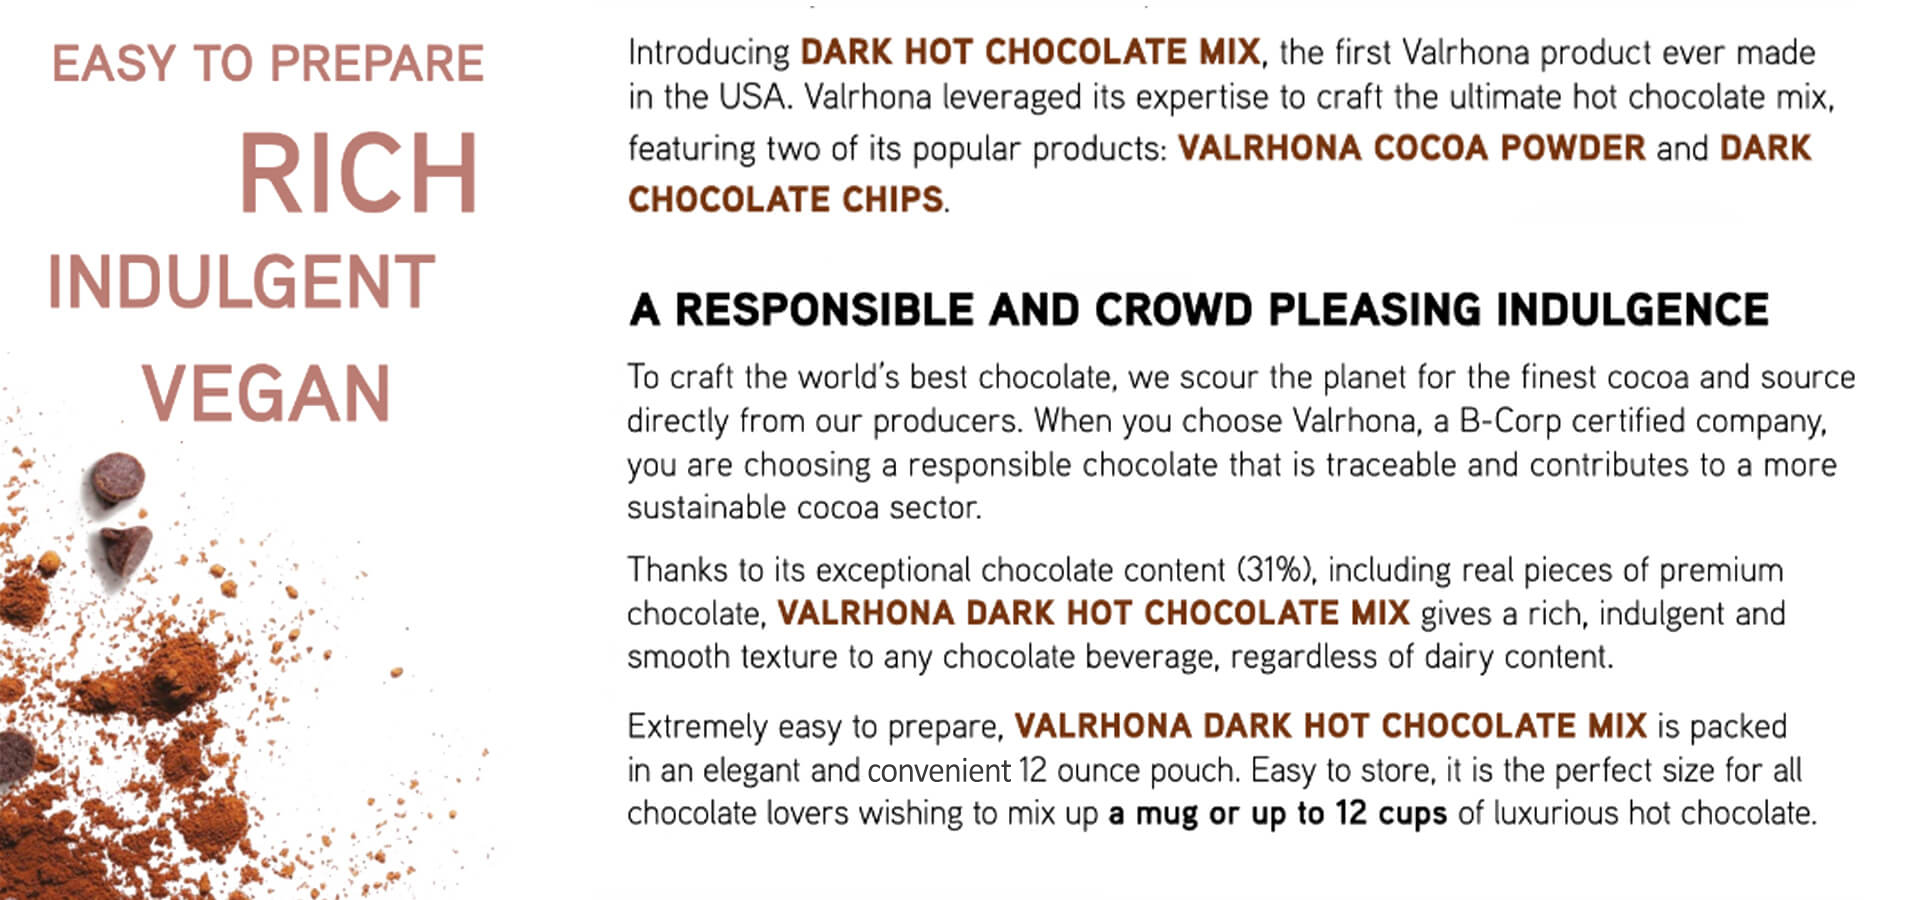 VALRHONA DARK HOT CHOCOLATE MIX, the first Valrhona product ever made in the USA. Valrhona leveraged its expertise to craft the ultimate Vegan hot chocolate mix, featuring two of its popular products: VALRHONA COCOA POWDER and DARK CHOCOLATE CHIPS. Thanks to its exceptional chocolate content (31%), including real pieces of premium chocolate, VALRHONA DARK HOT CHOCOLATE MIX gives a rich, indulgent and smooth texture to any chocolate beverage, regardless of dairy content.